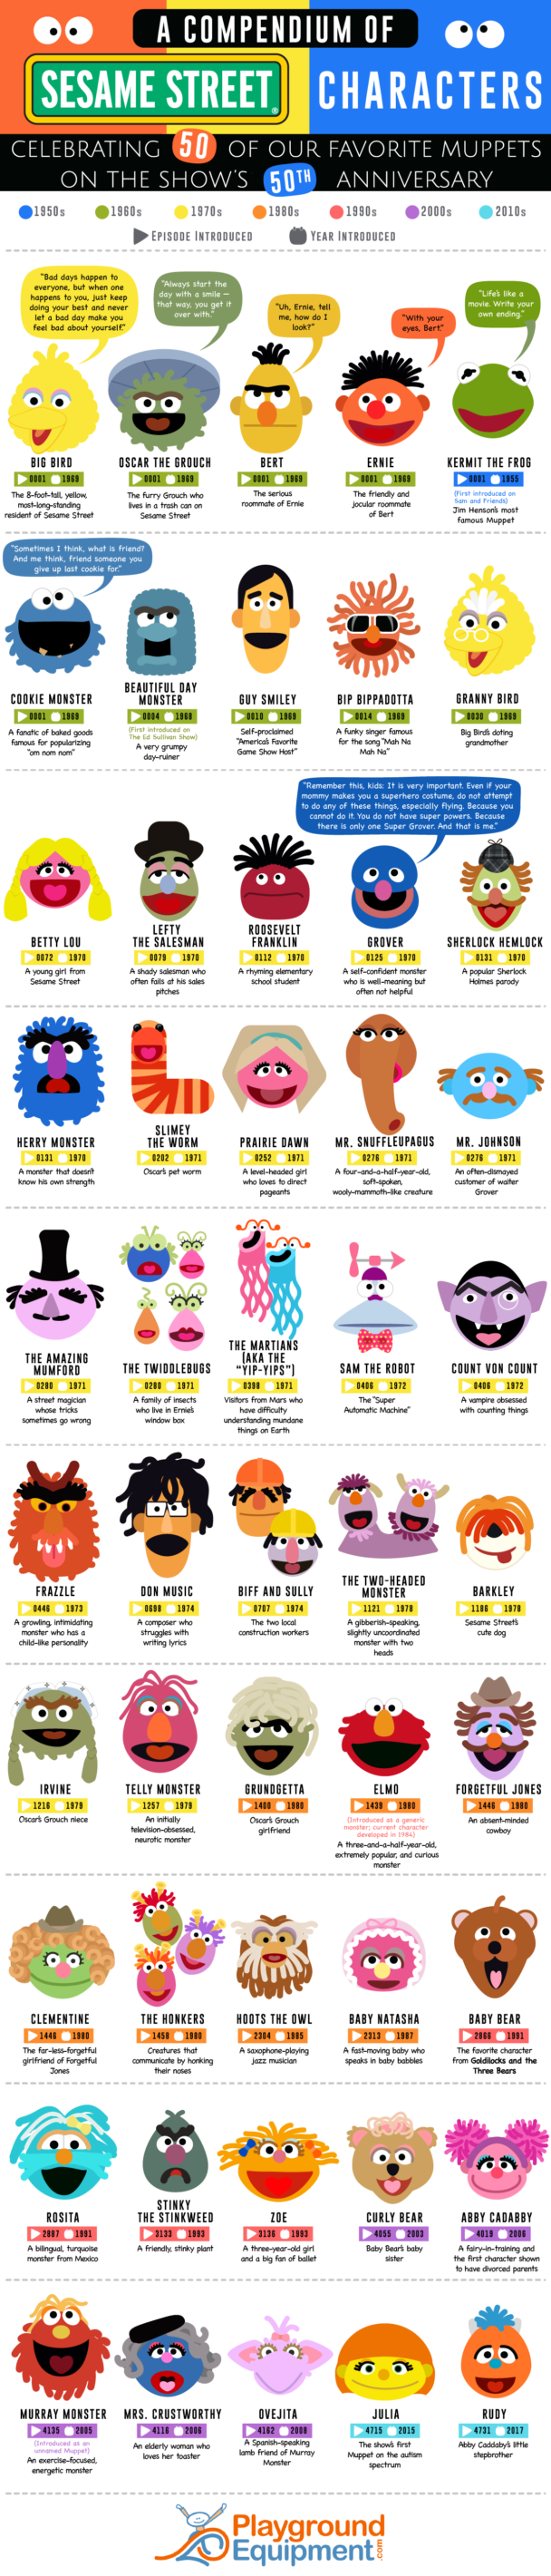 Infographic A compendium of Sesame Street characters Infographic.tv